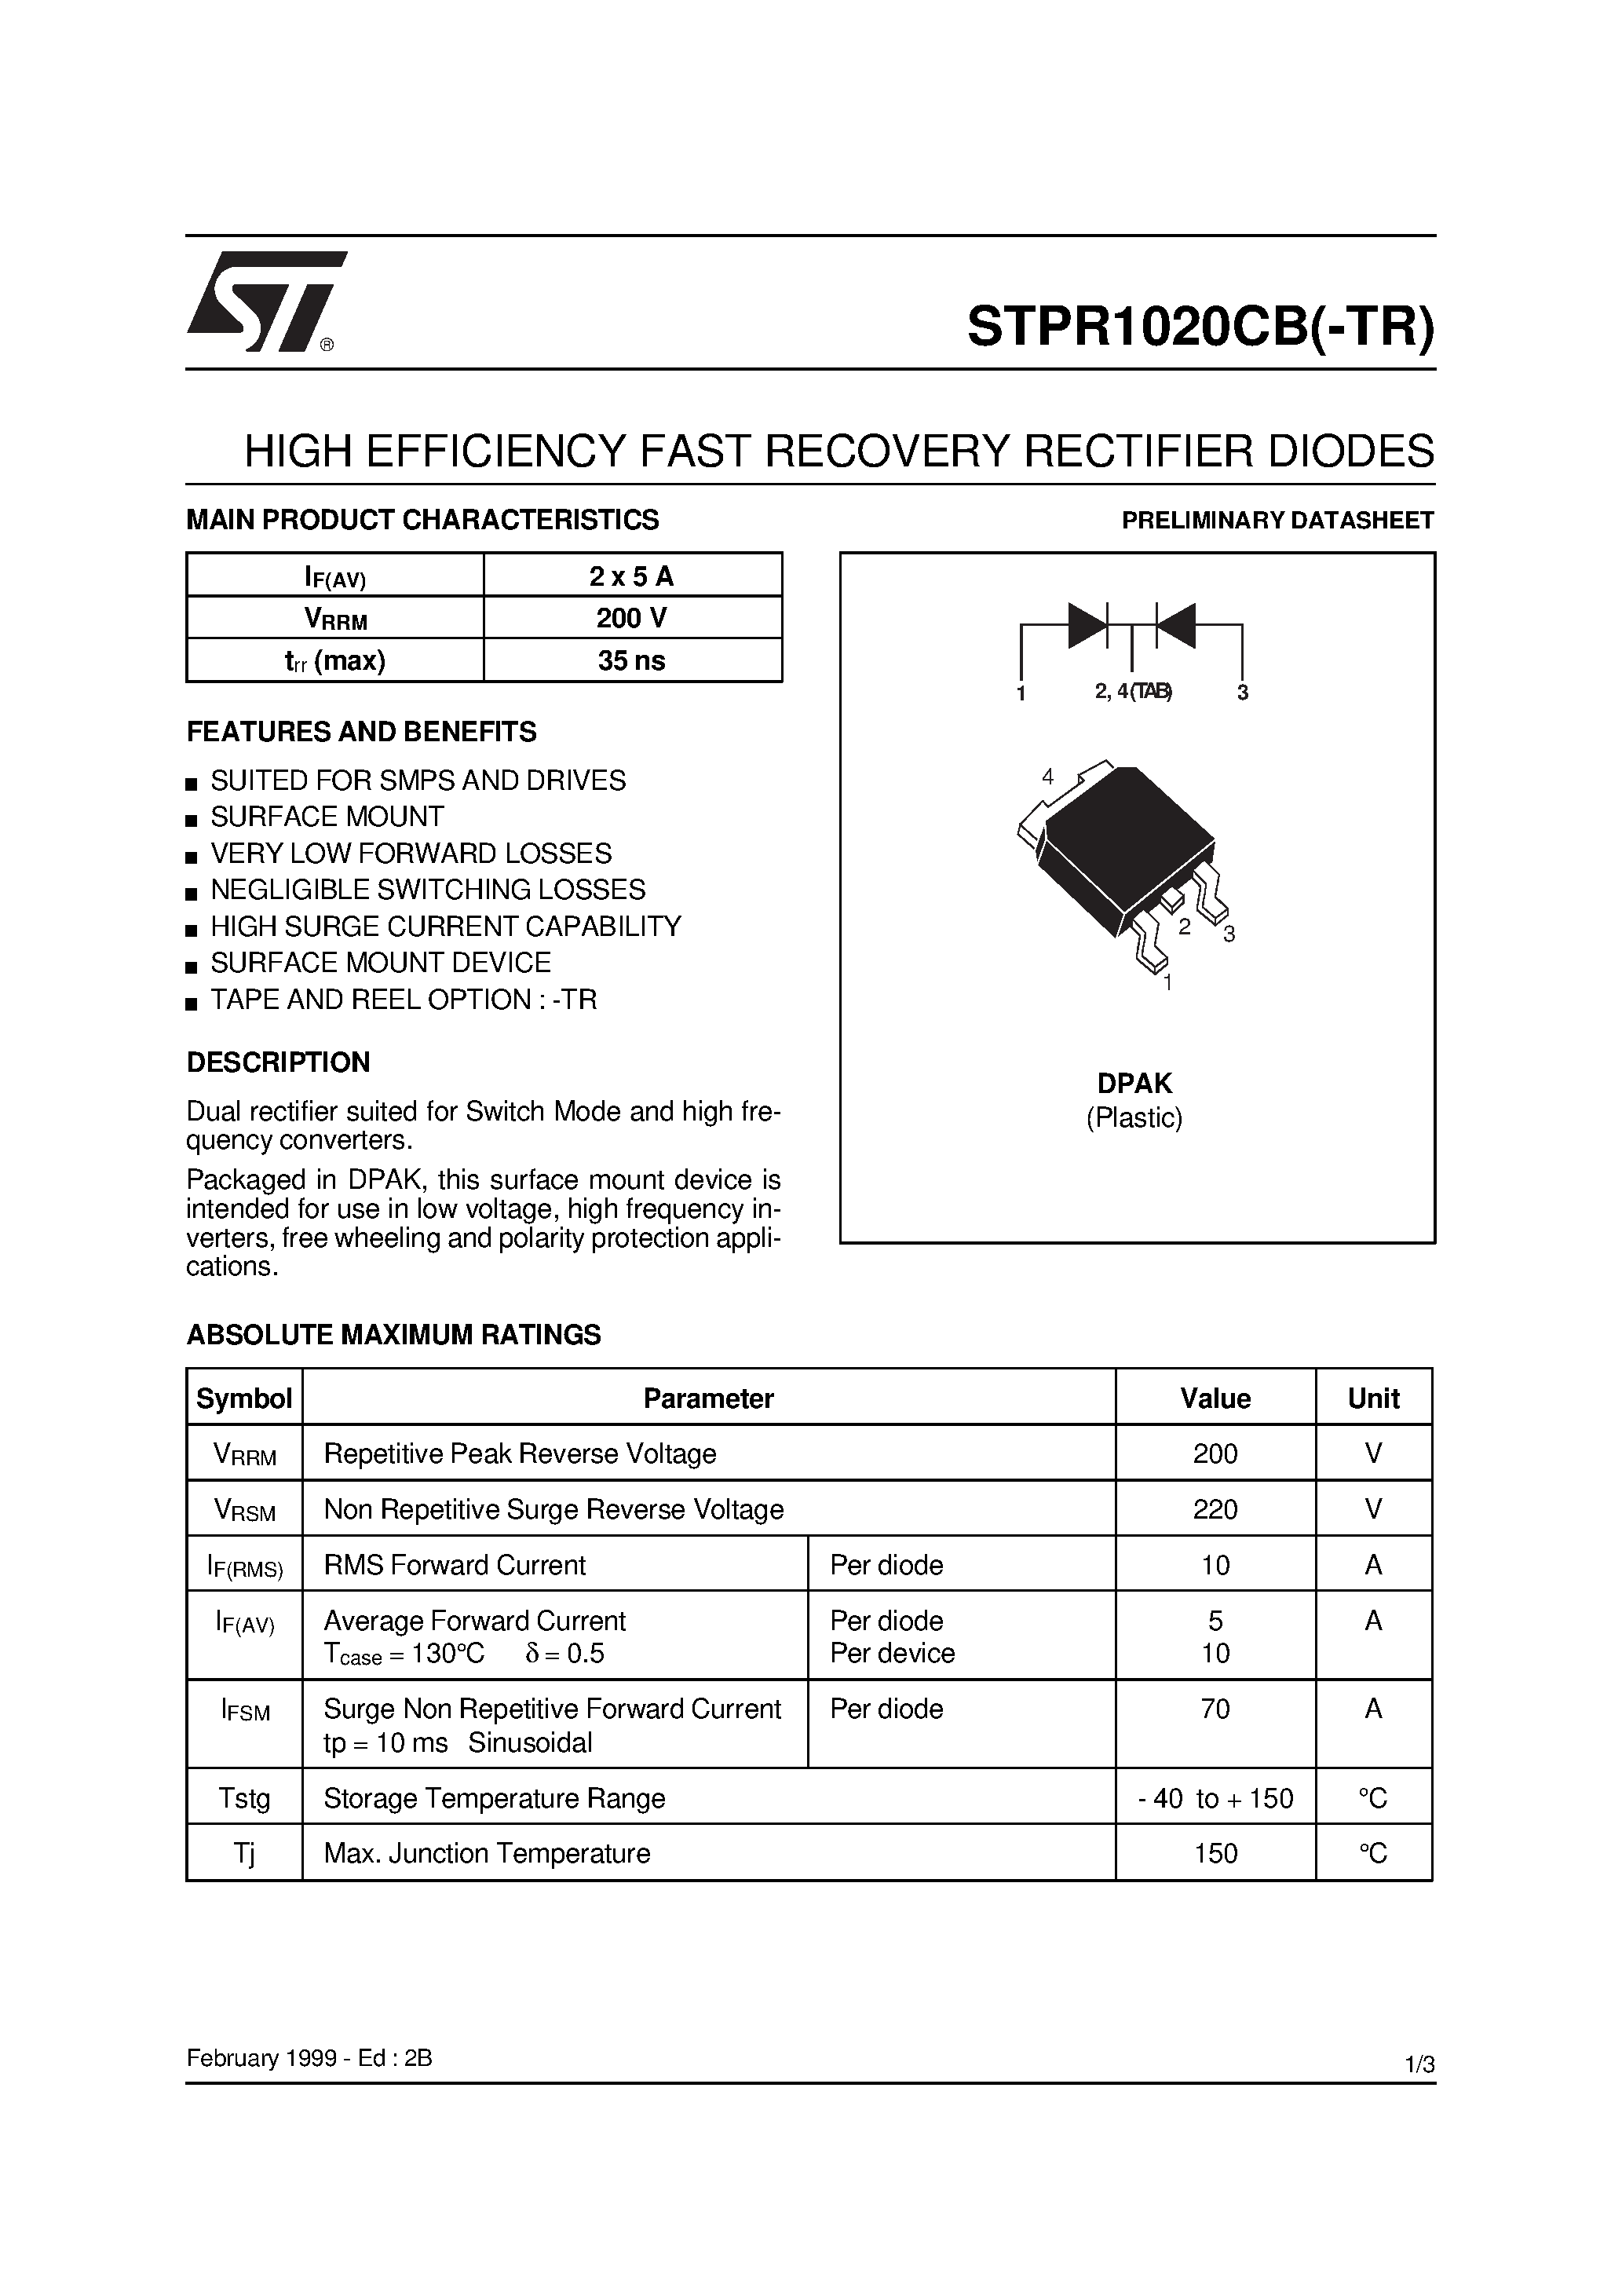 Datasheet STPR1020CB-TR - HIGH EFFICIENCY FAST RECOVERY RECTIFIER DIODES page 1